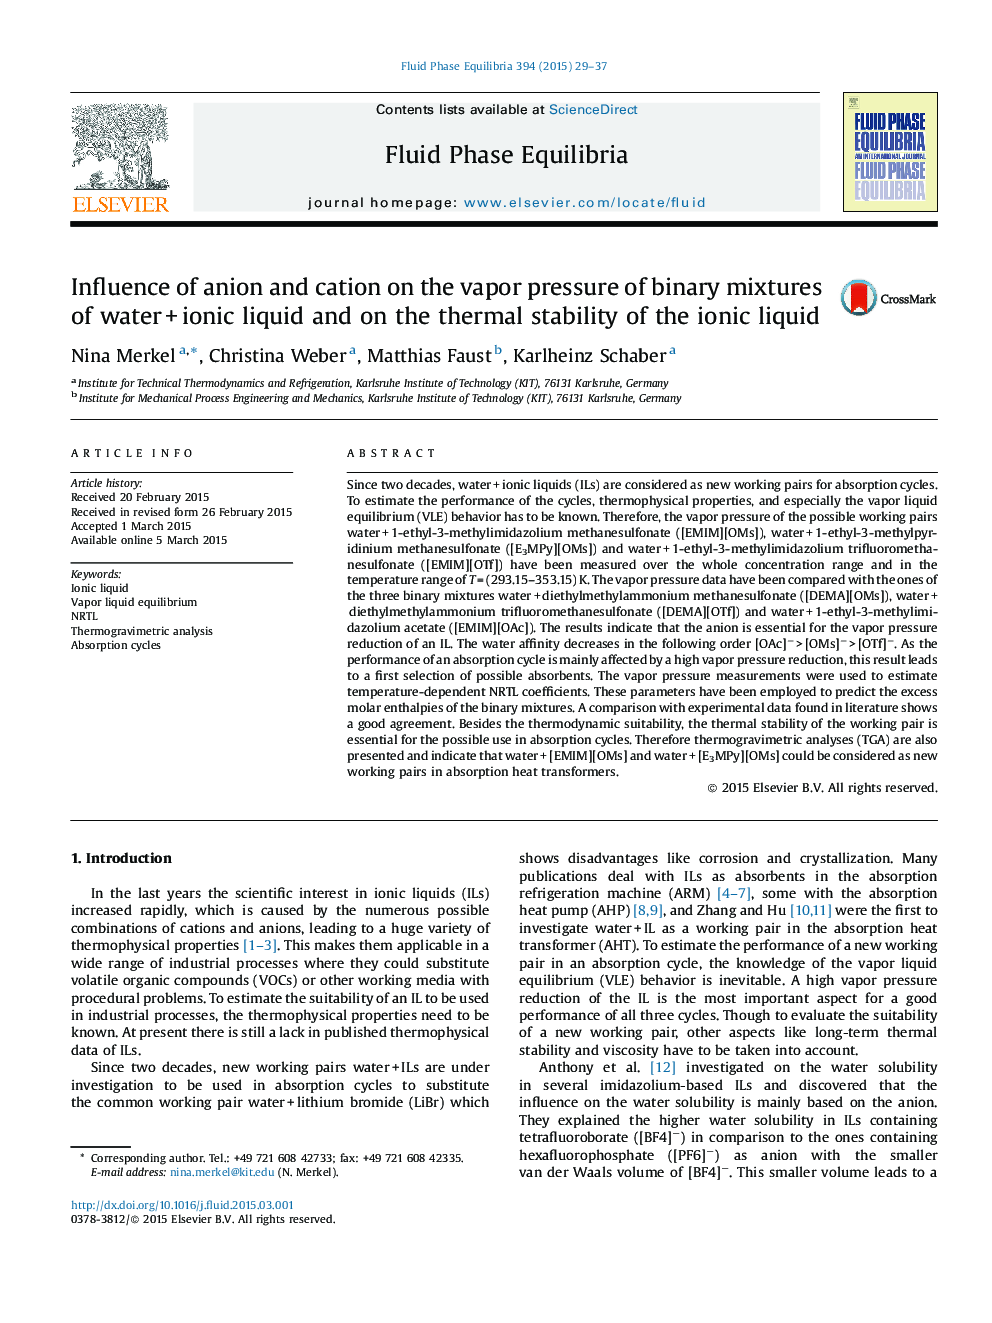 Influence of anion and cation on the vapor pressure of binary mixtures of waterÂ +Â ionic liquid and on the thermal stability of the ionic liquid